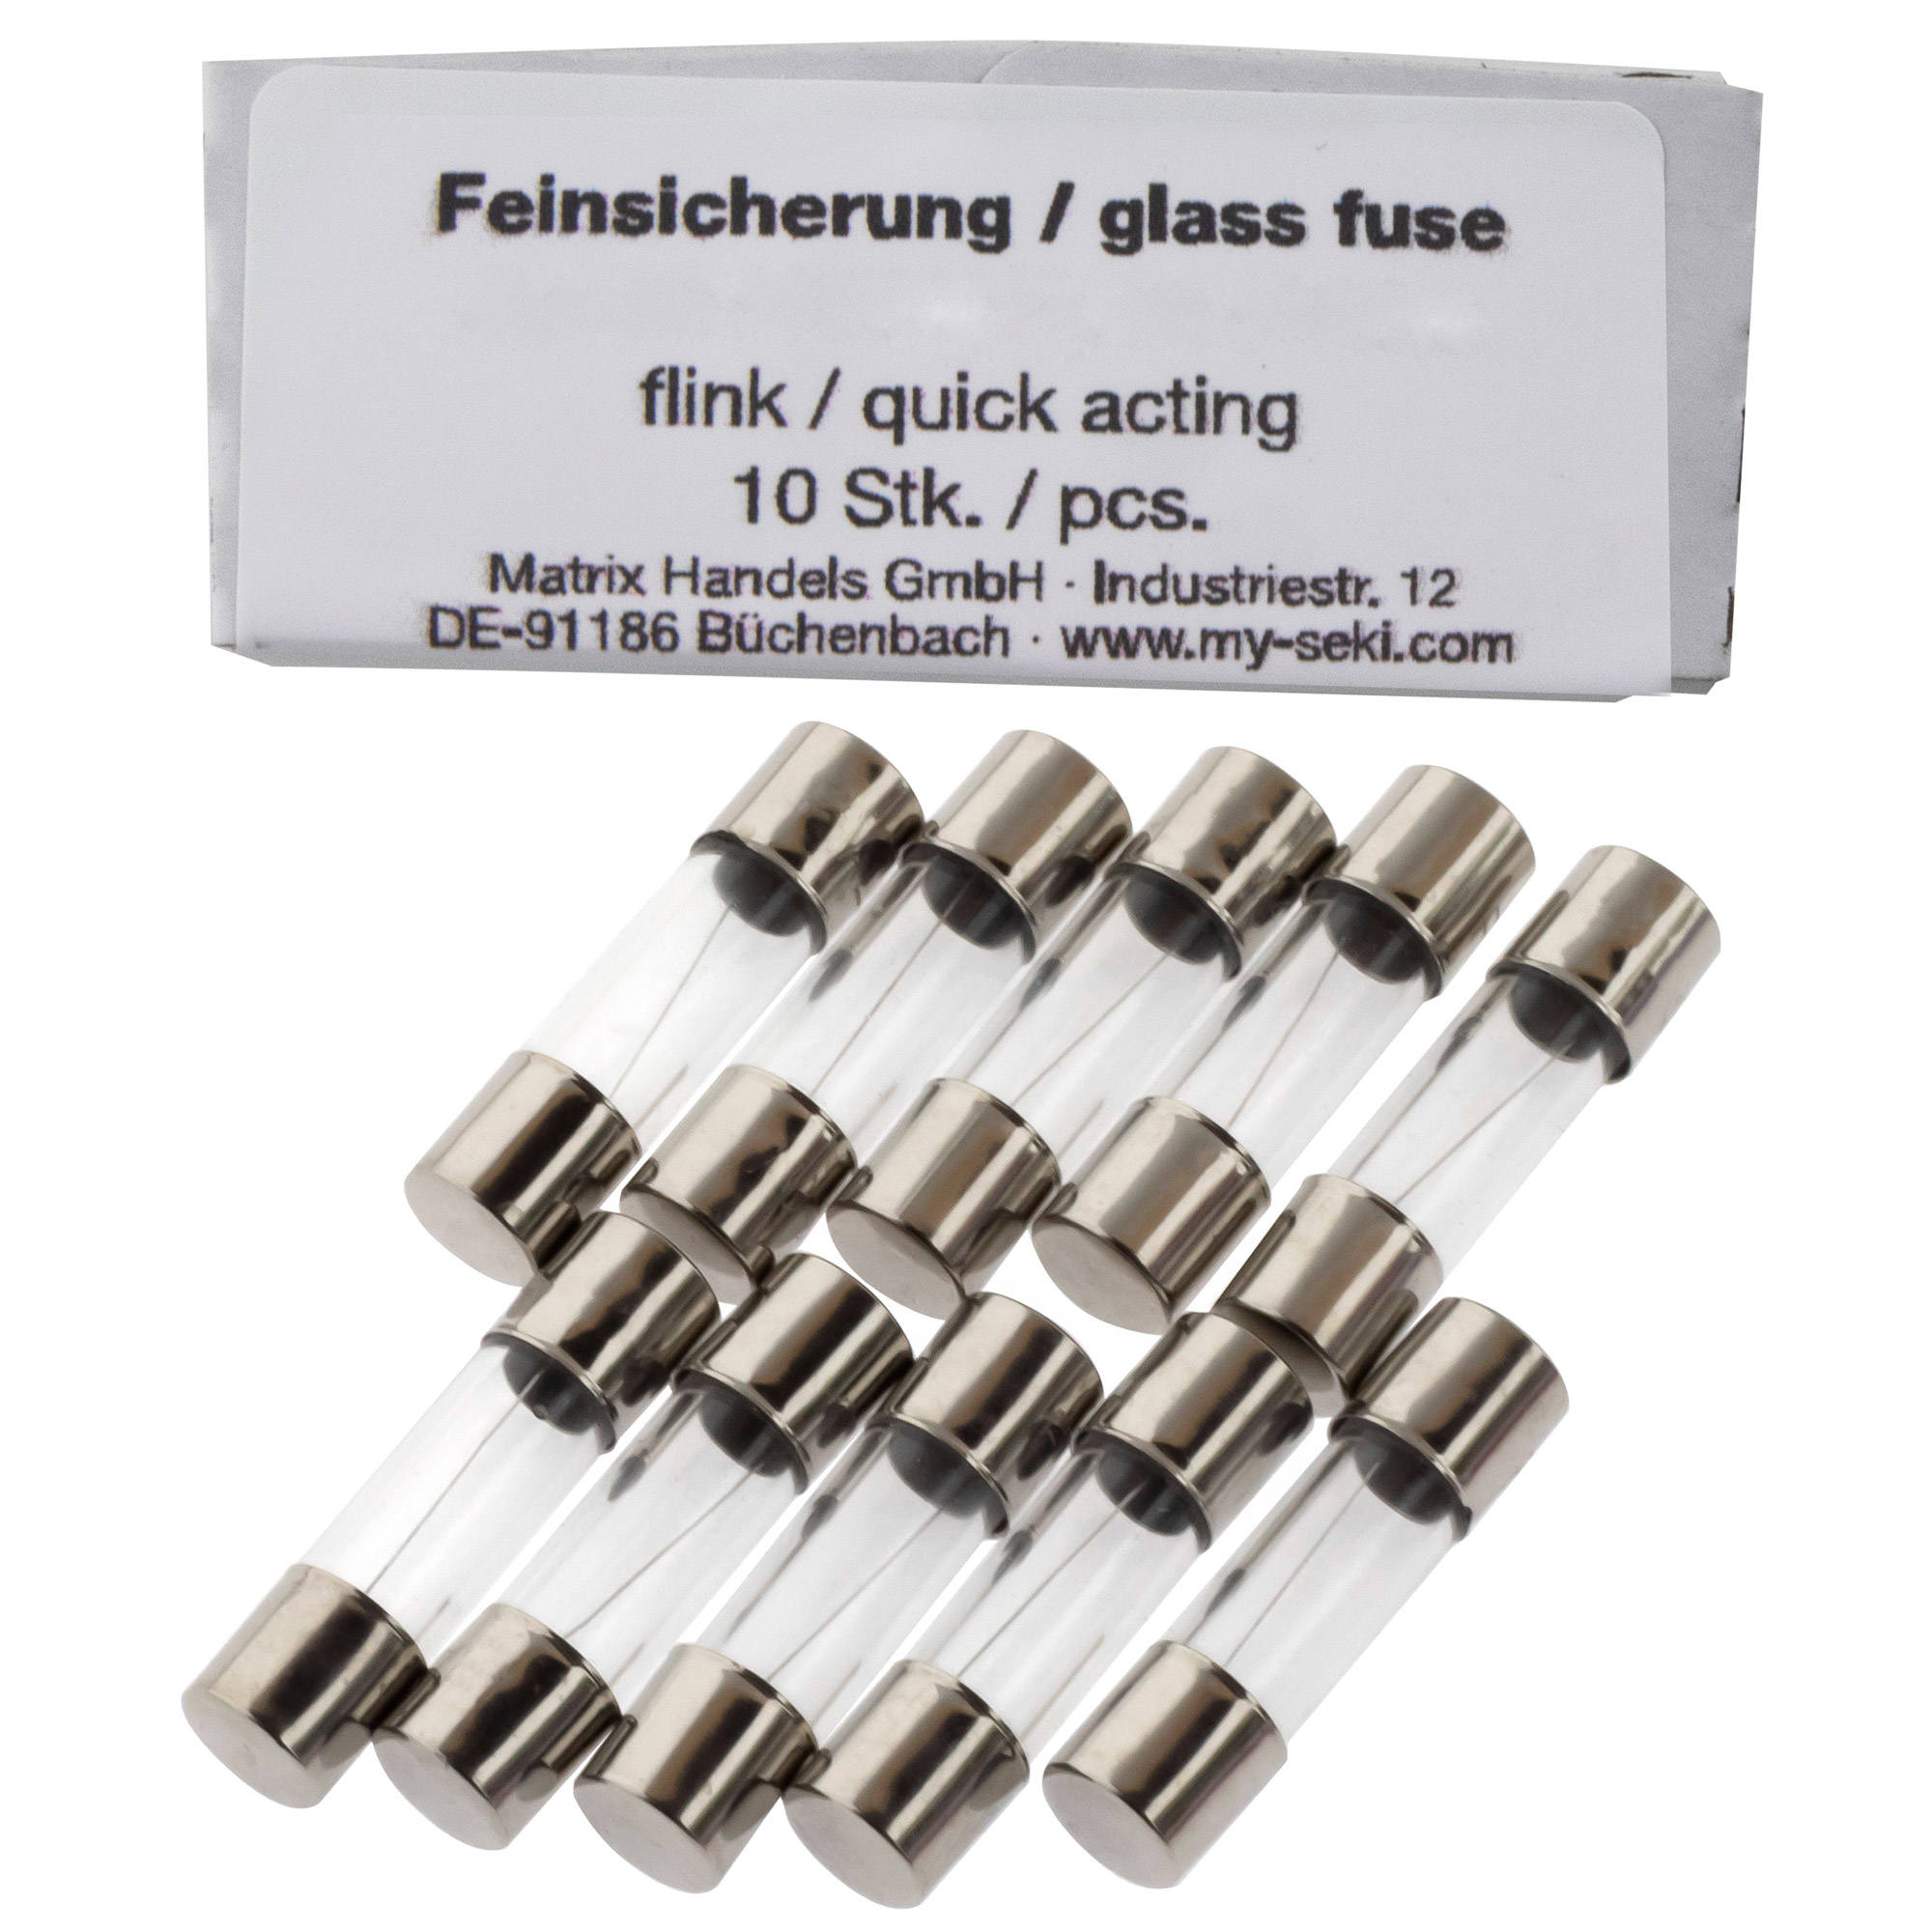 Micro Fuse 5,0A, 5x20mm, quick acting